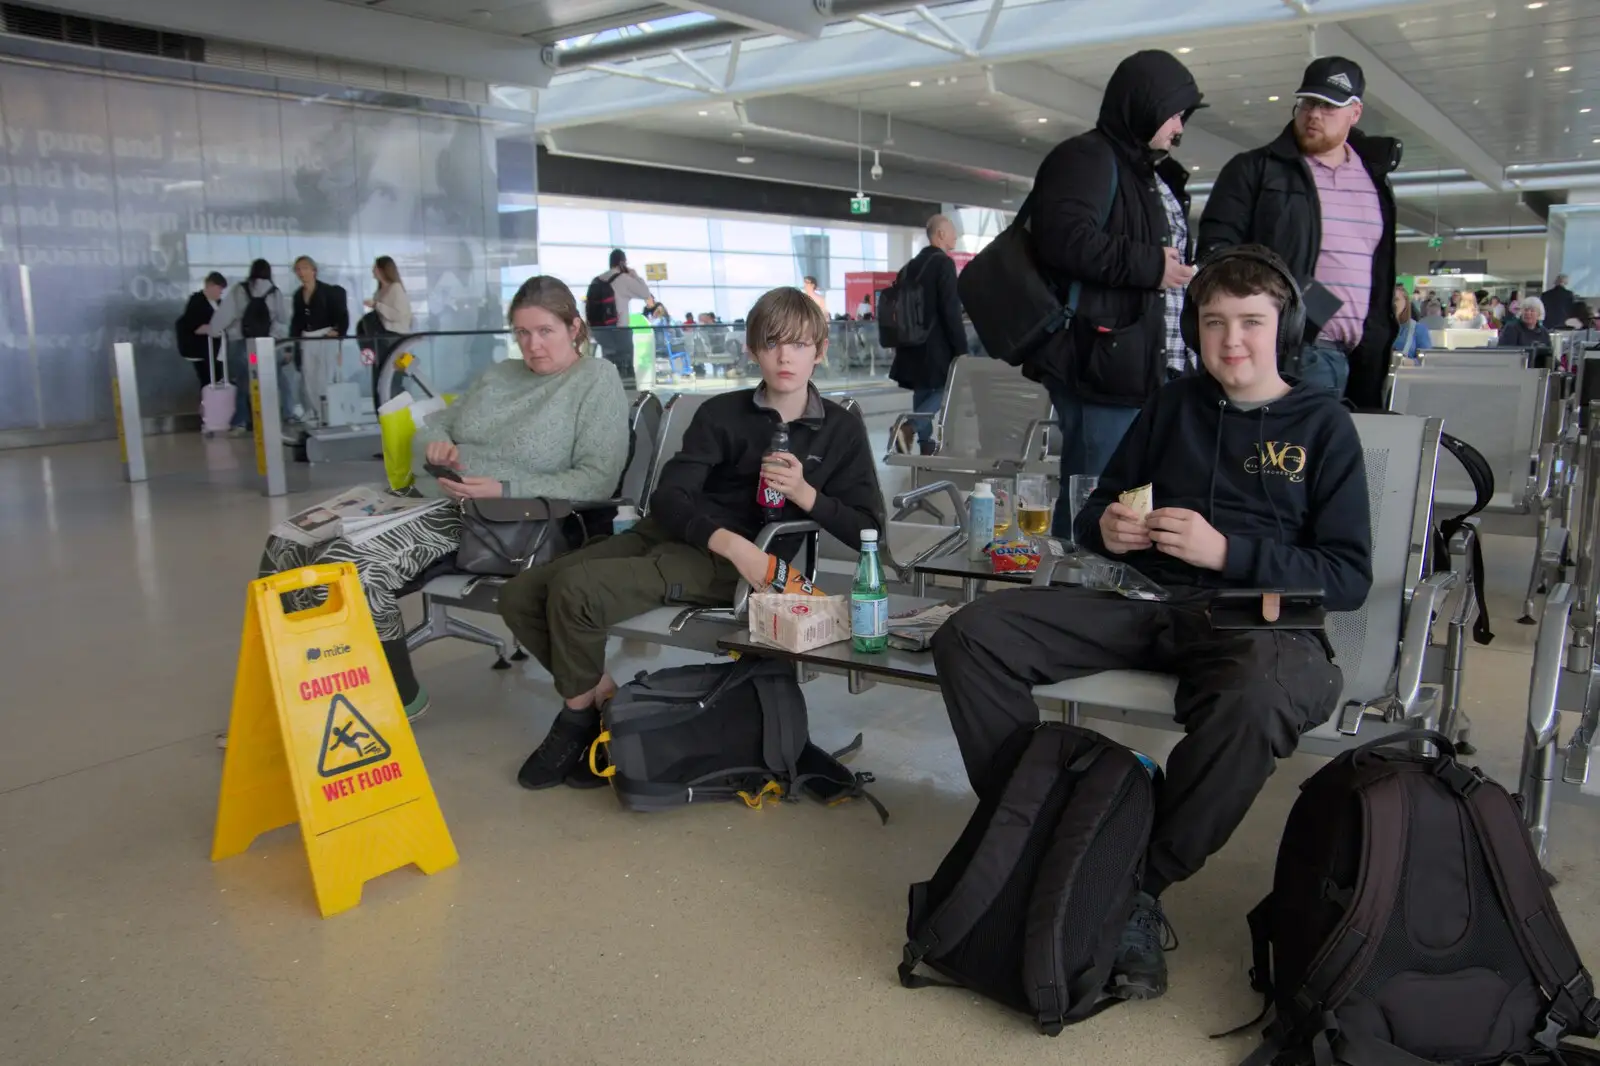 We're hanging around at a departure gate again, from A Couple of Days in Dublin, Ireland - 12th April 2024